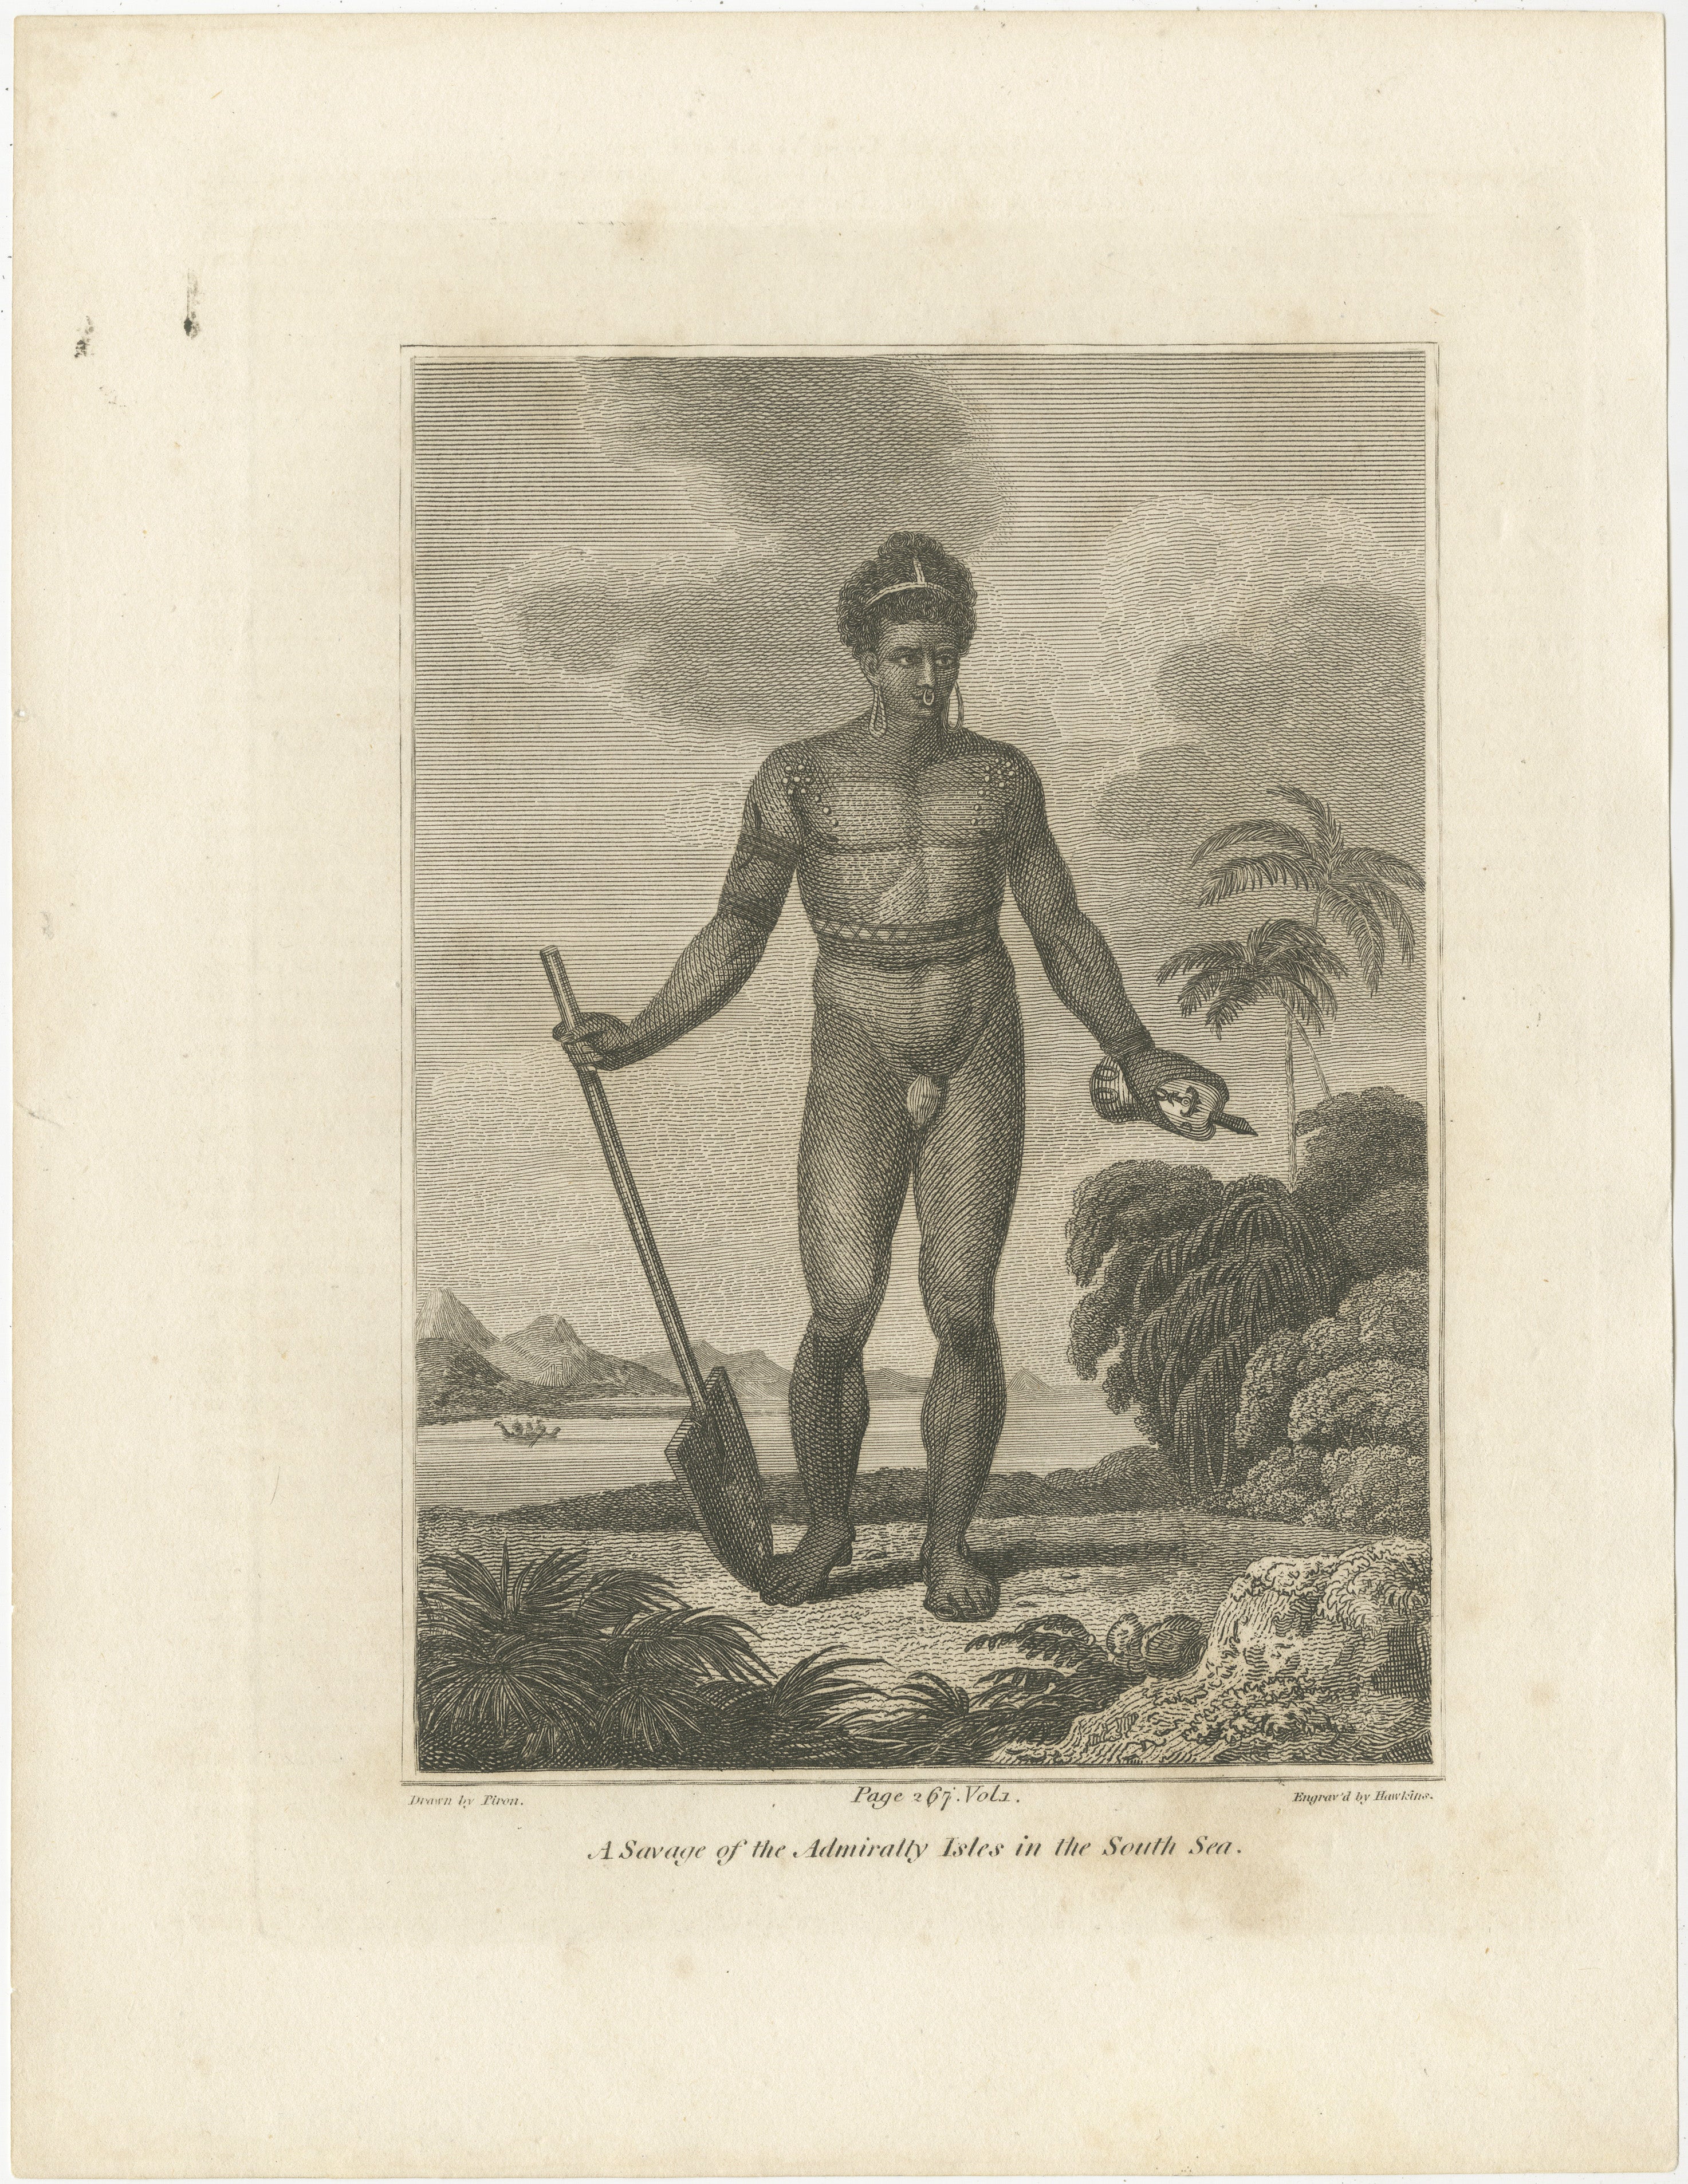 The 1801 engraving depicts a figure labeled as 